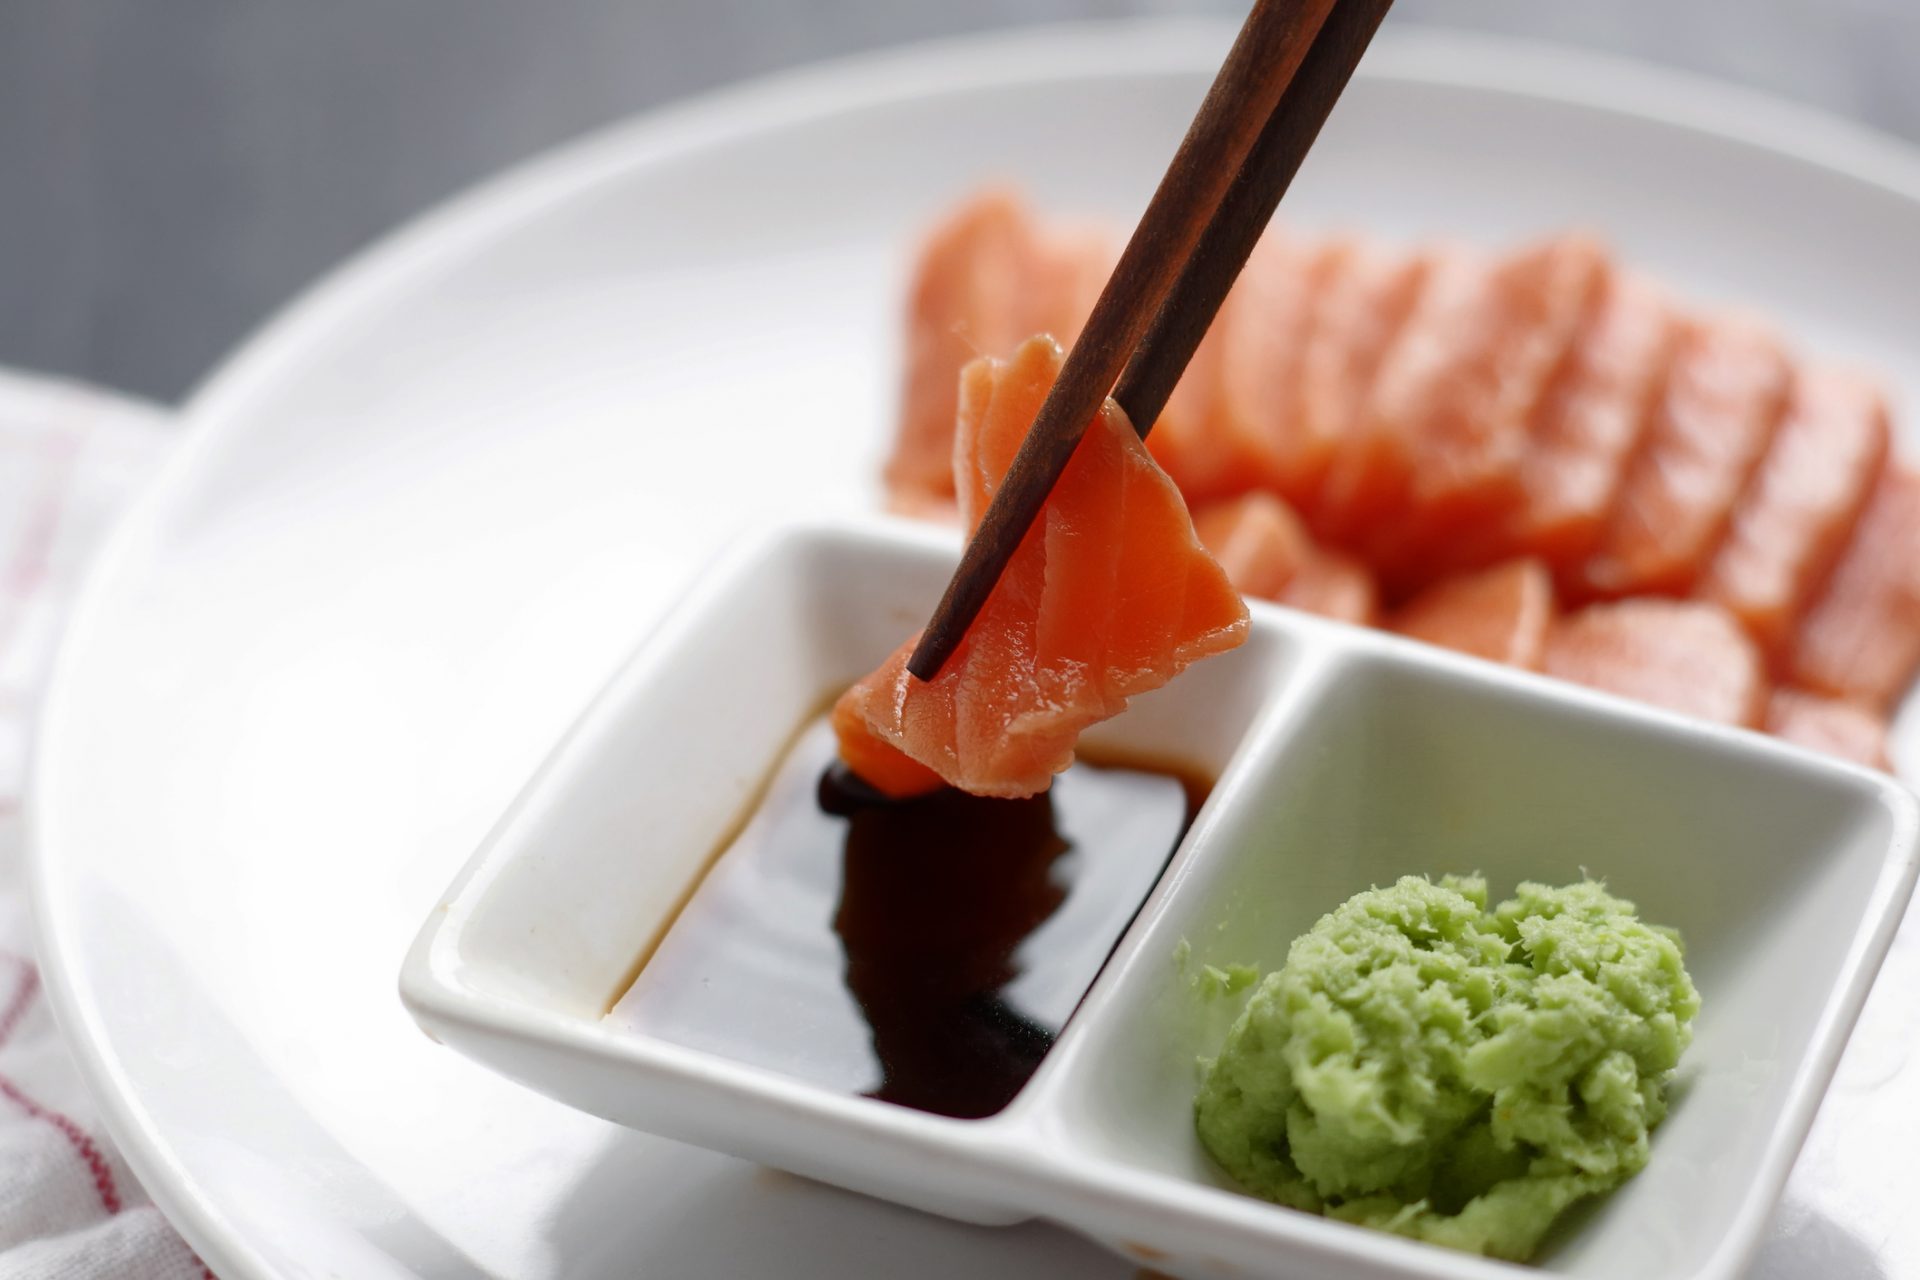 How can wasabi help boost memory? 